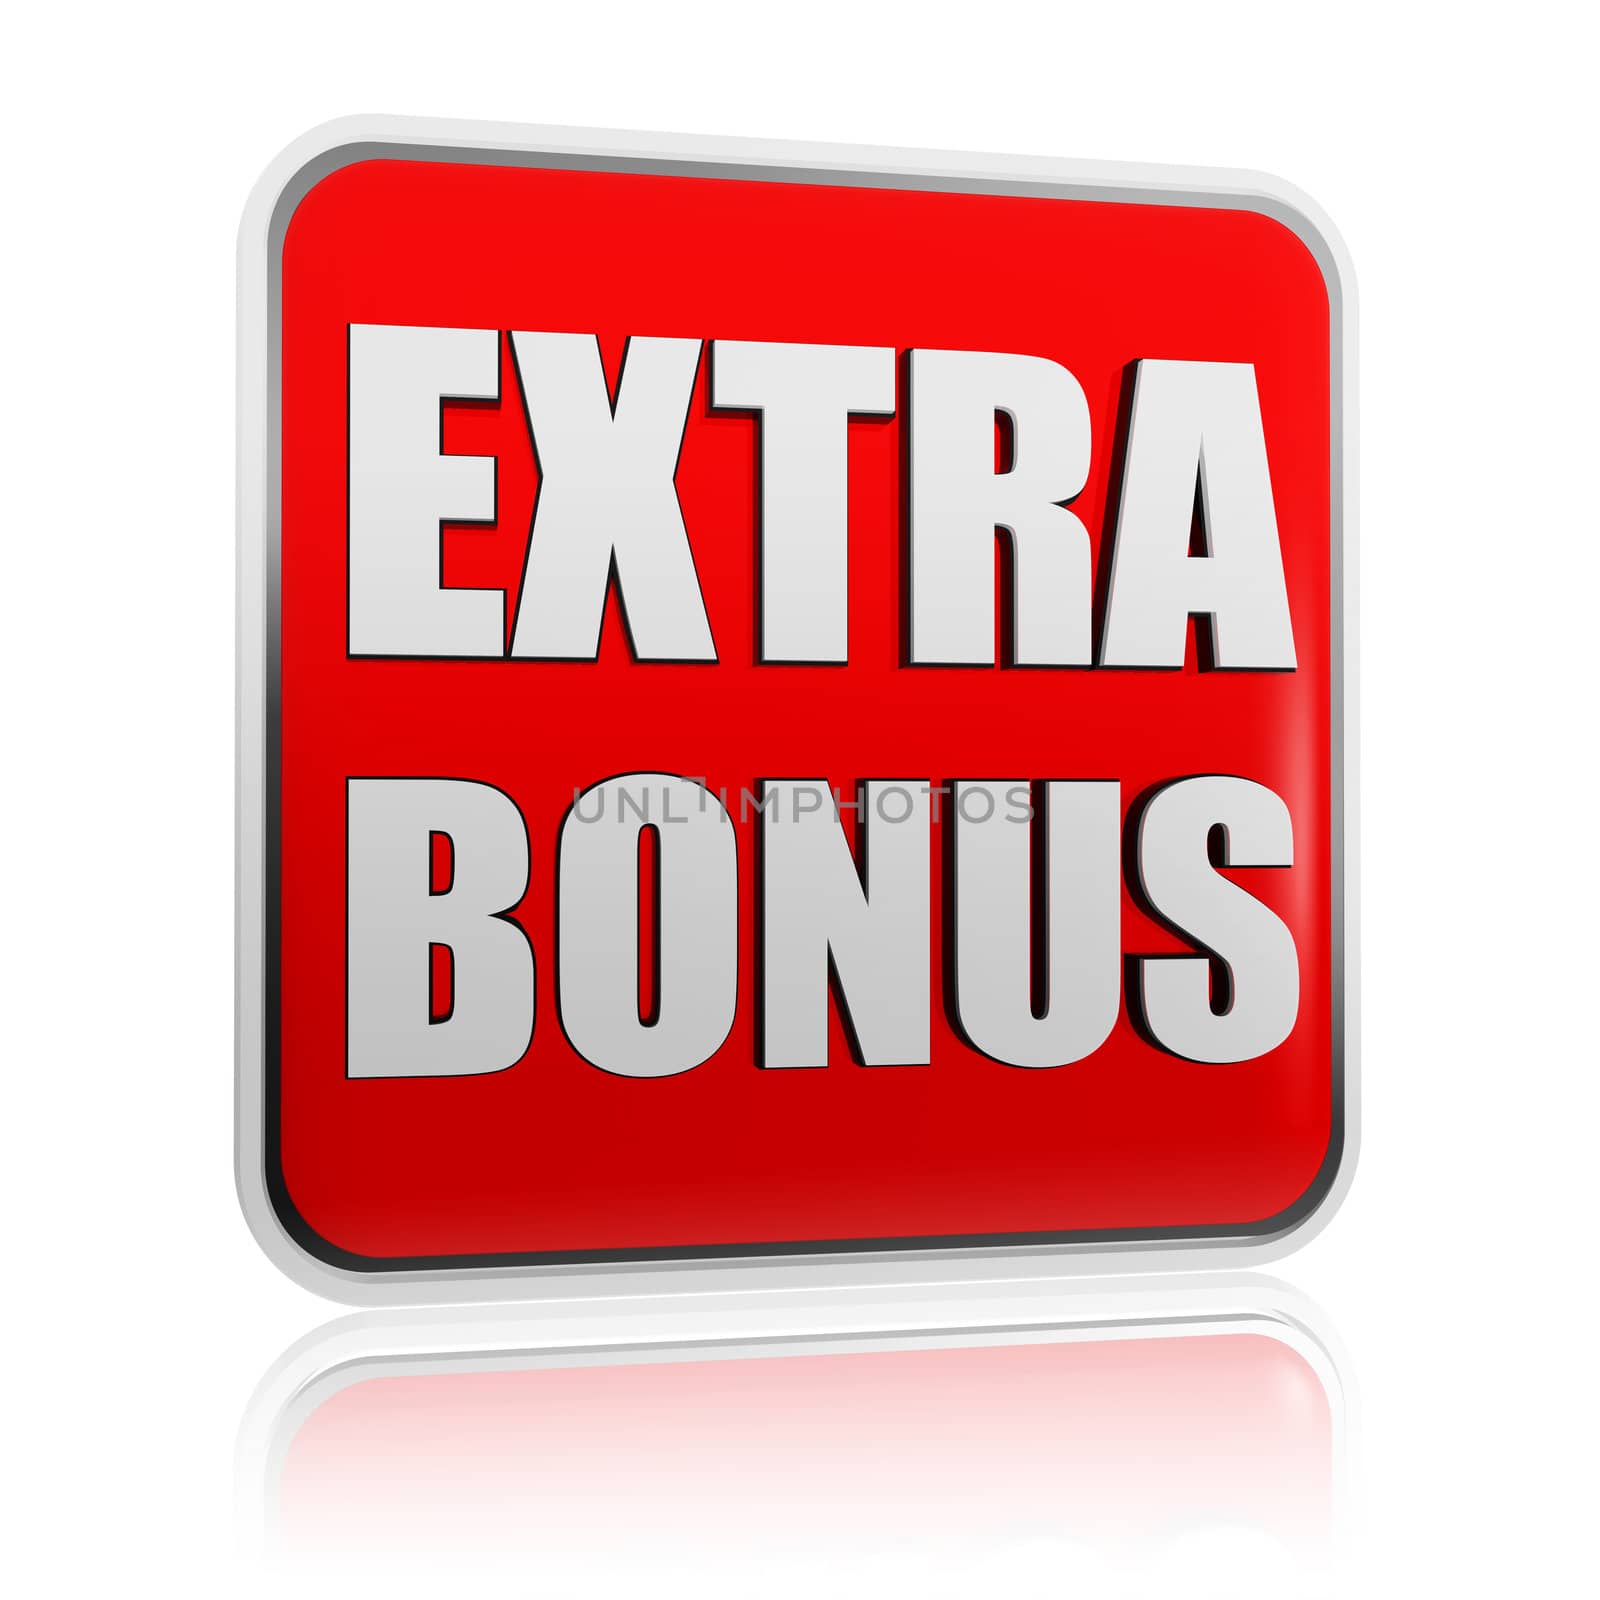 extra bonus - 3d red banner with white text like button, business concept